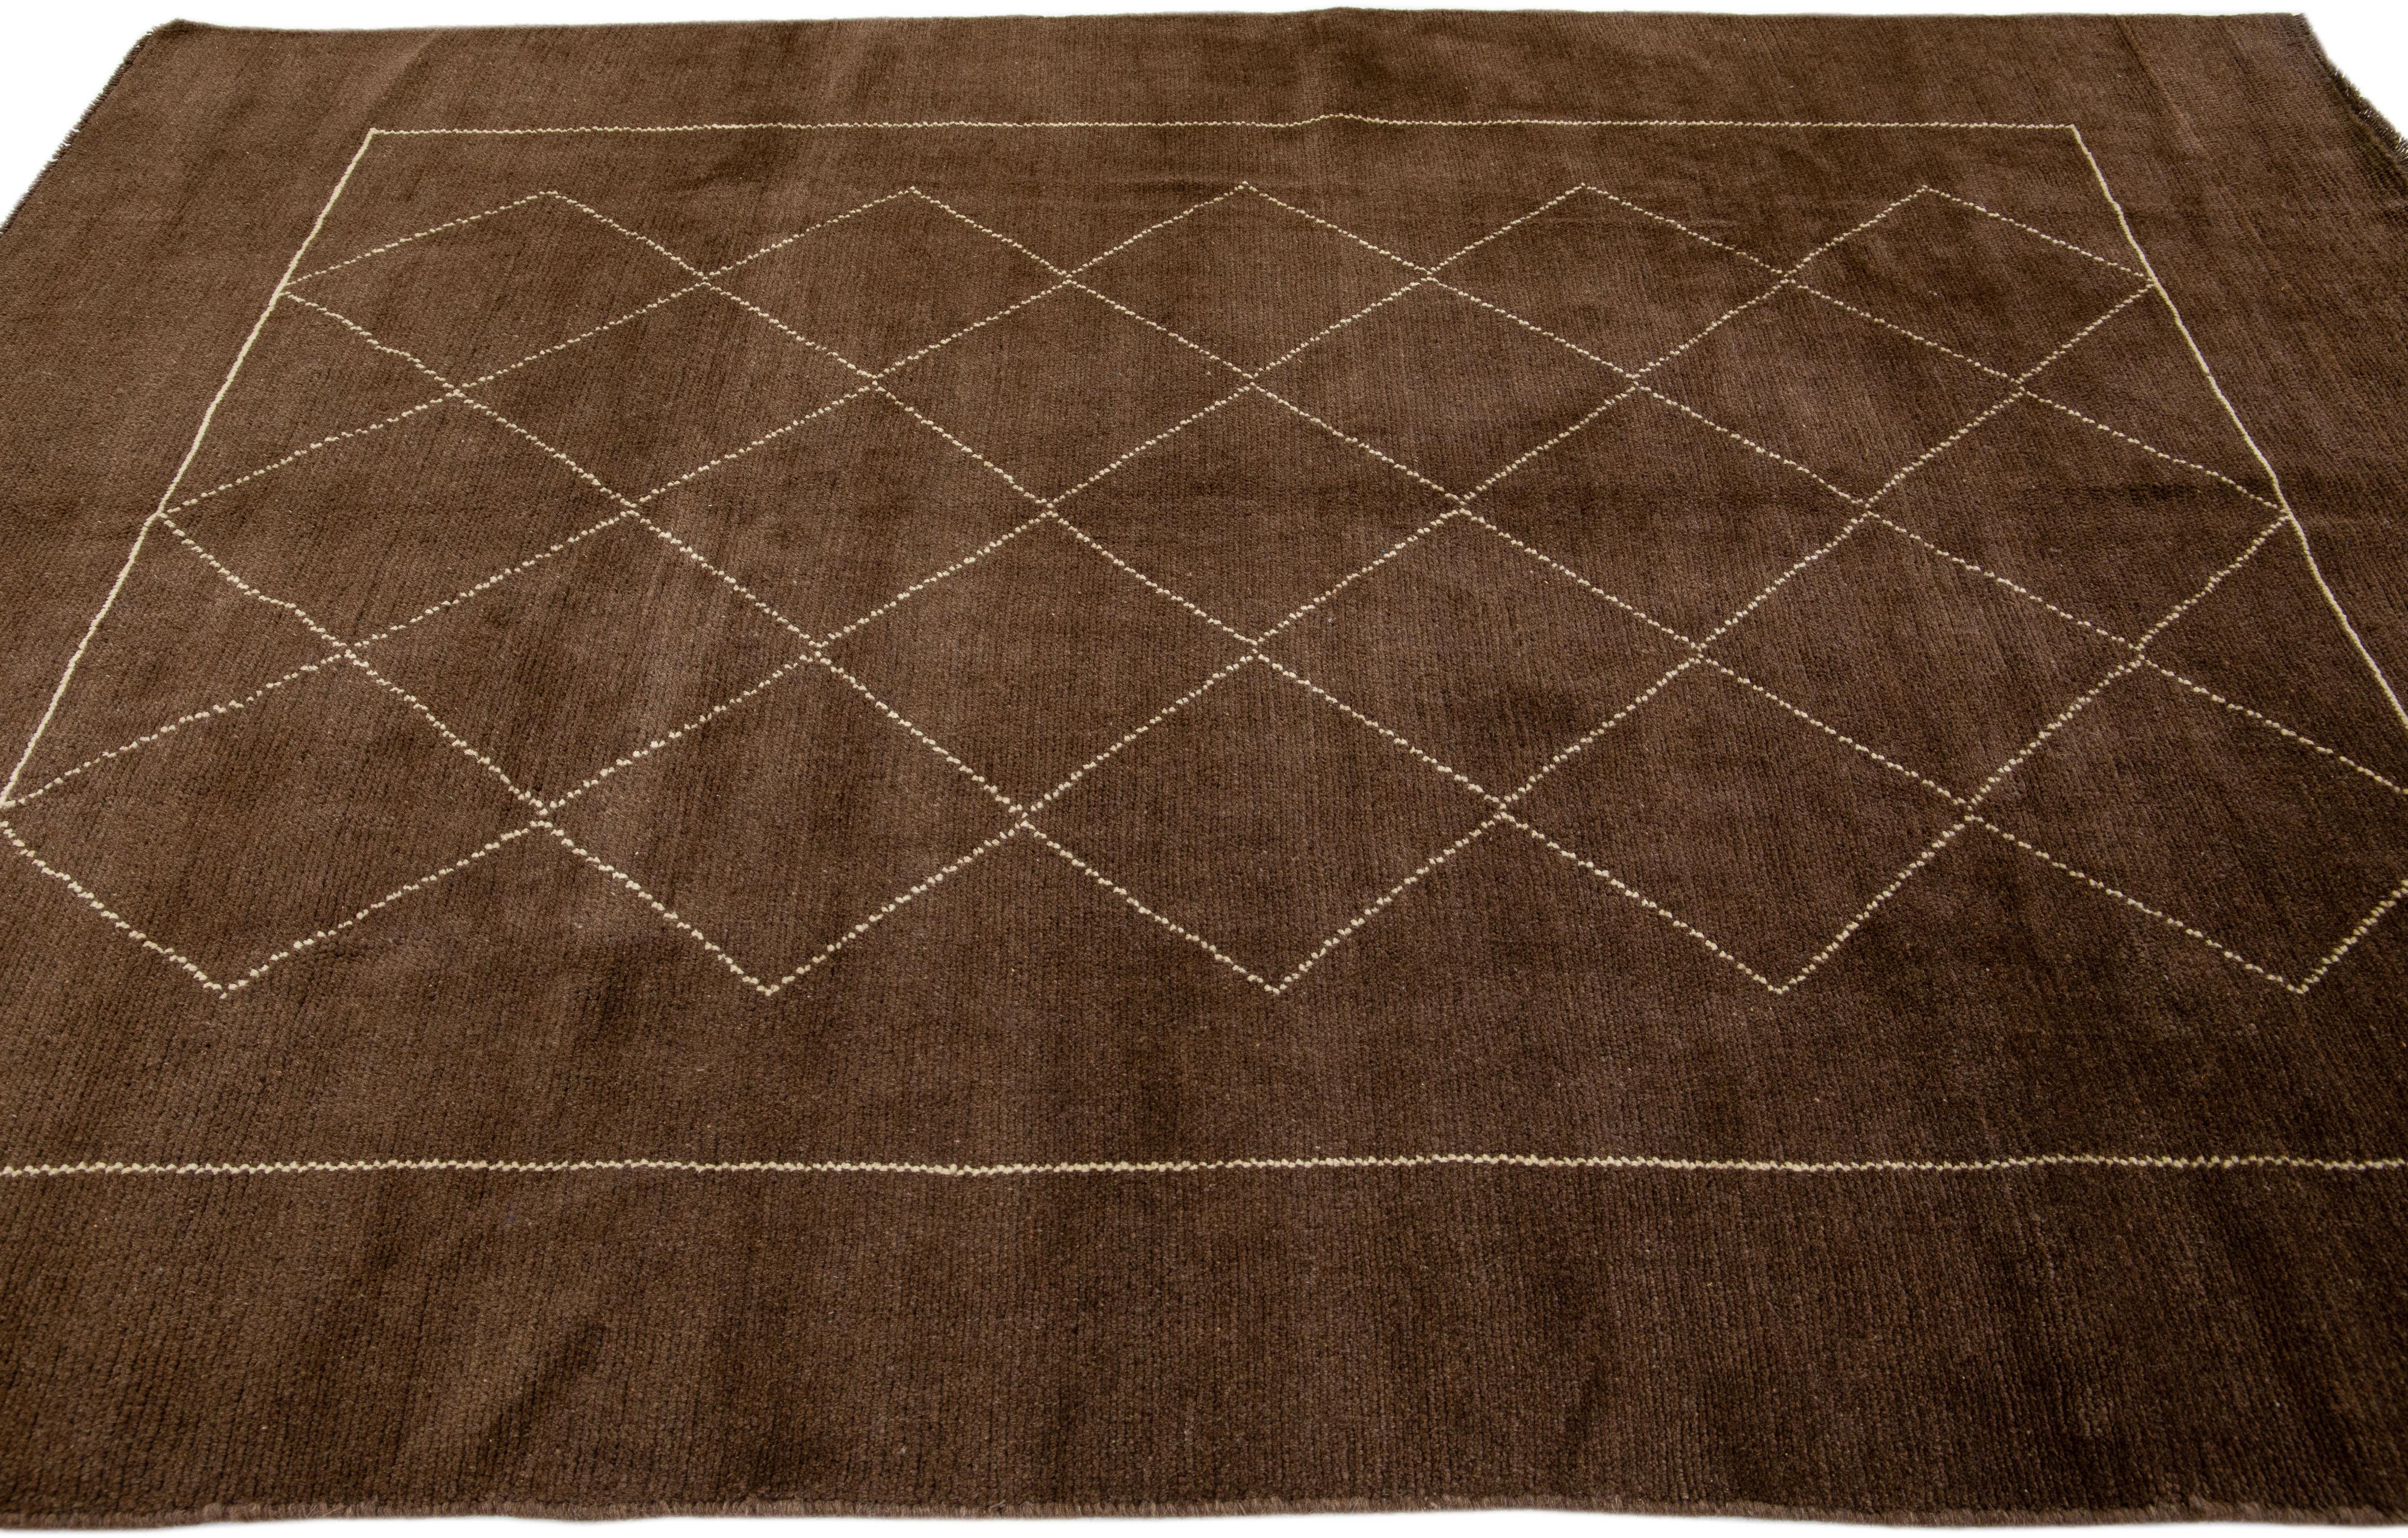 Contemporary Brown Modern Moroccan Style Handmade Tribal Pattern Wool Rug by Apadana For Sale